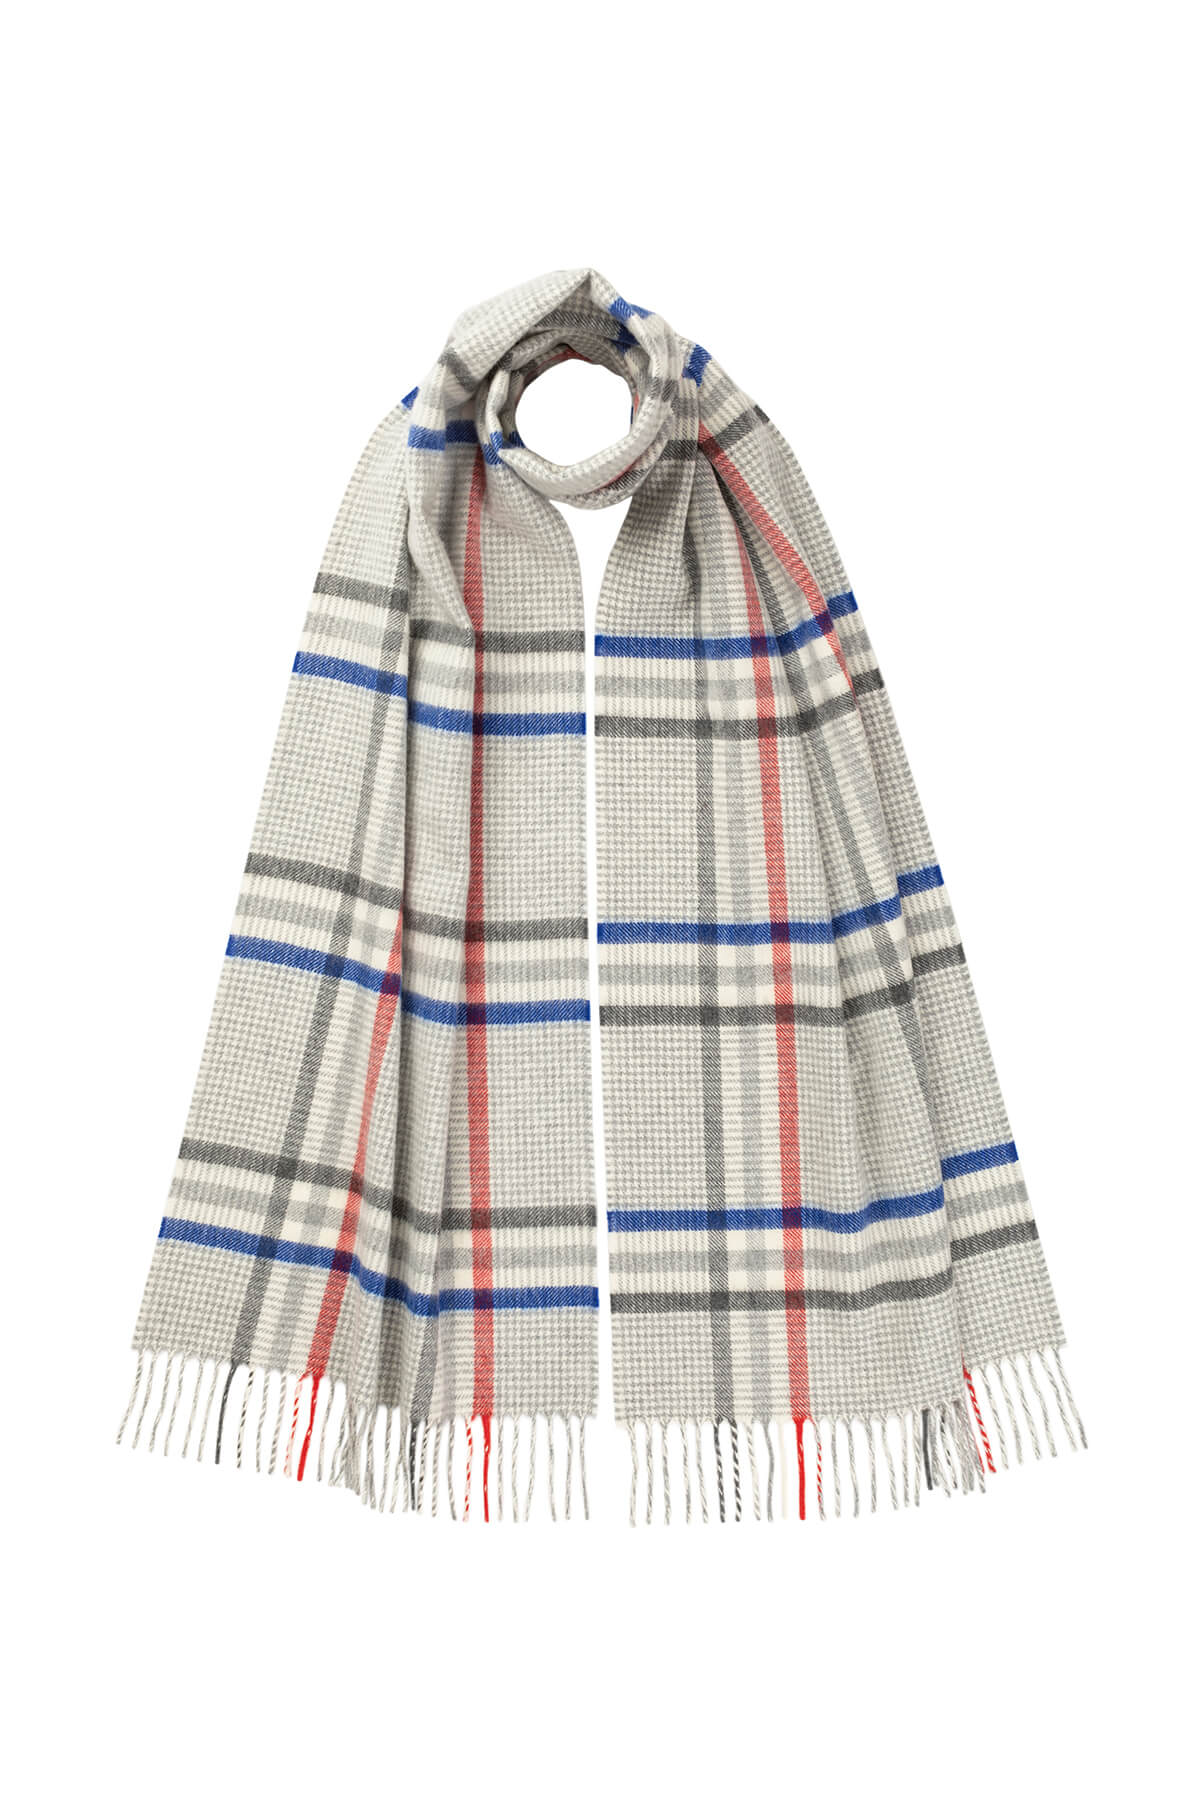 Johnstons of Elgin Houndstooth Check Merino Wool Scarf in Light Grey on a white background WDC01797RU7361ONE